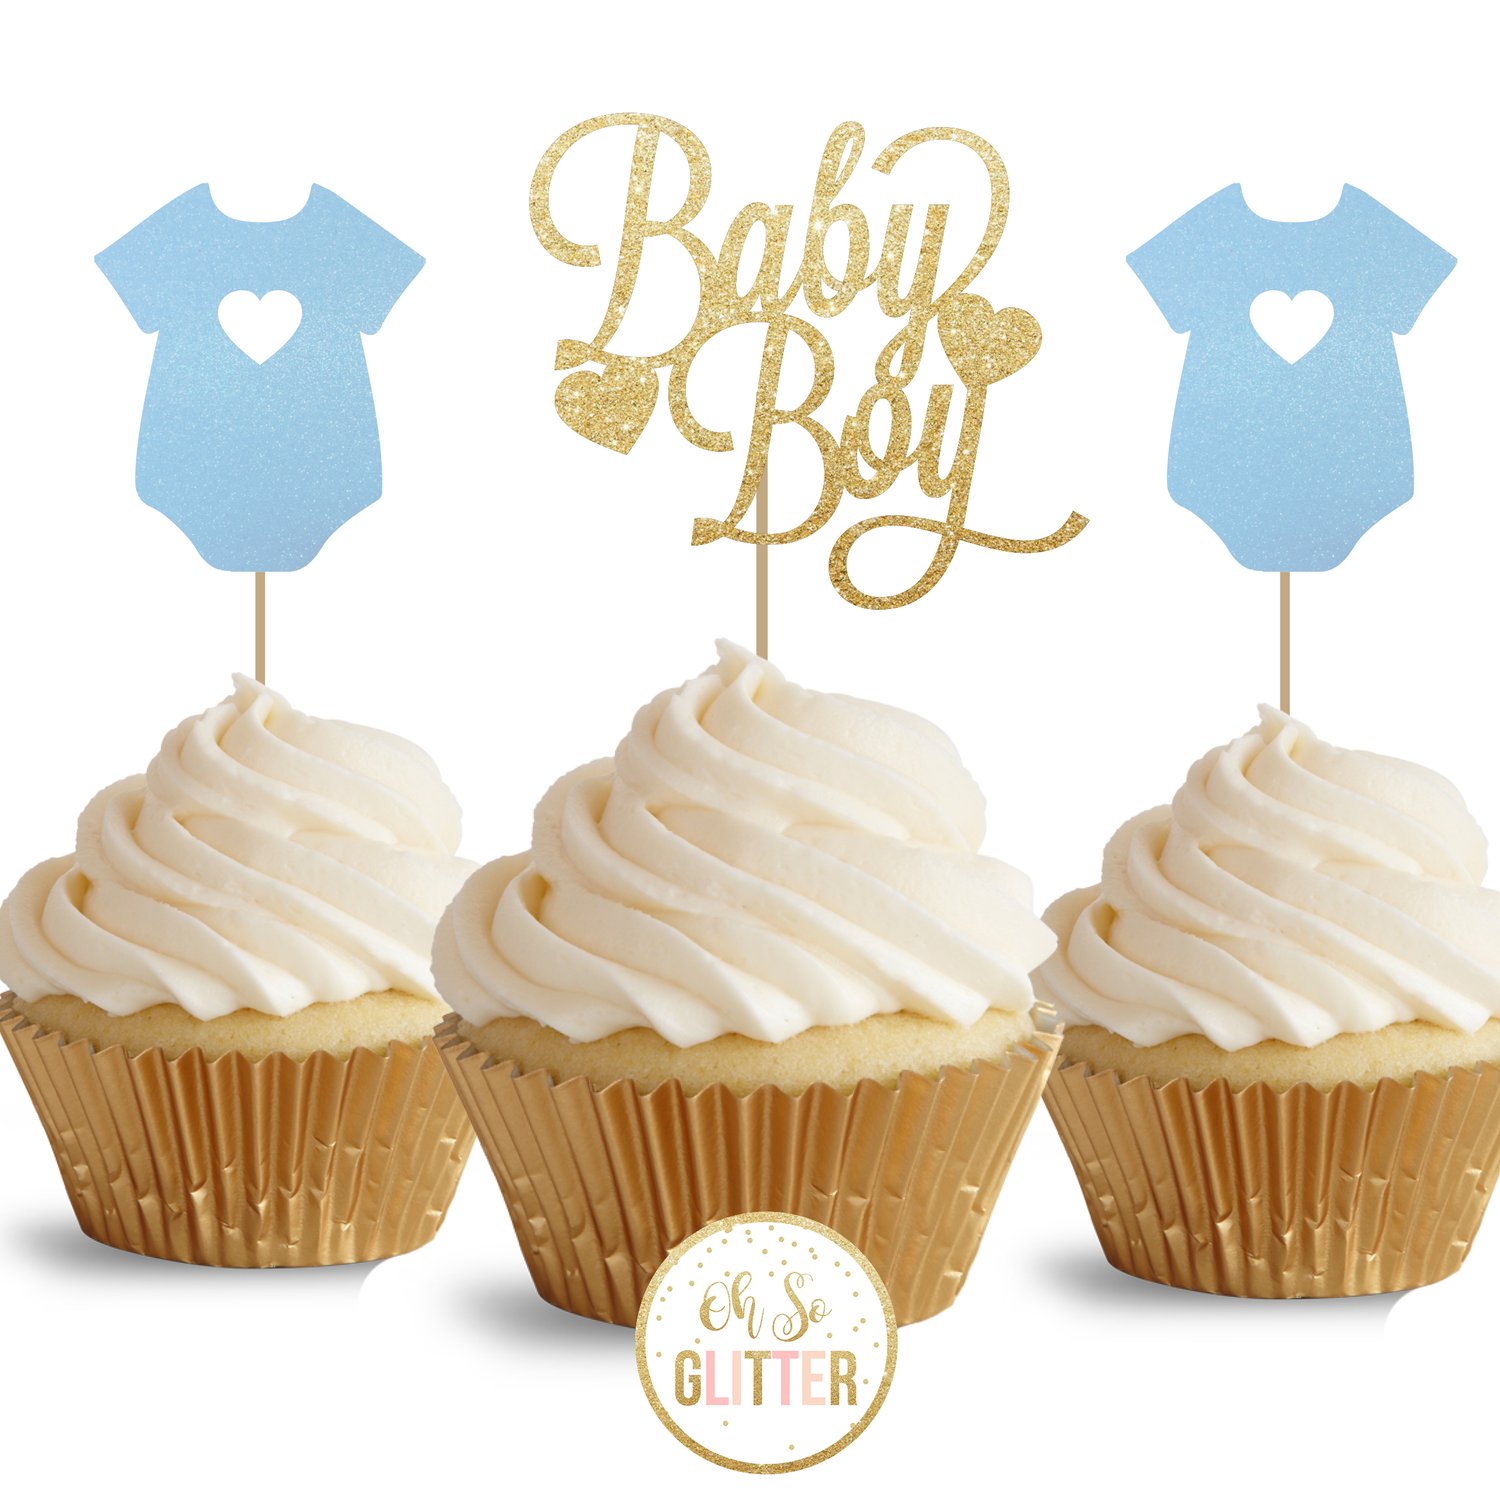 Image of Baby Boy - glitter cupcake toppers - pack of 12